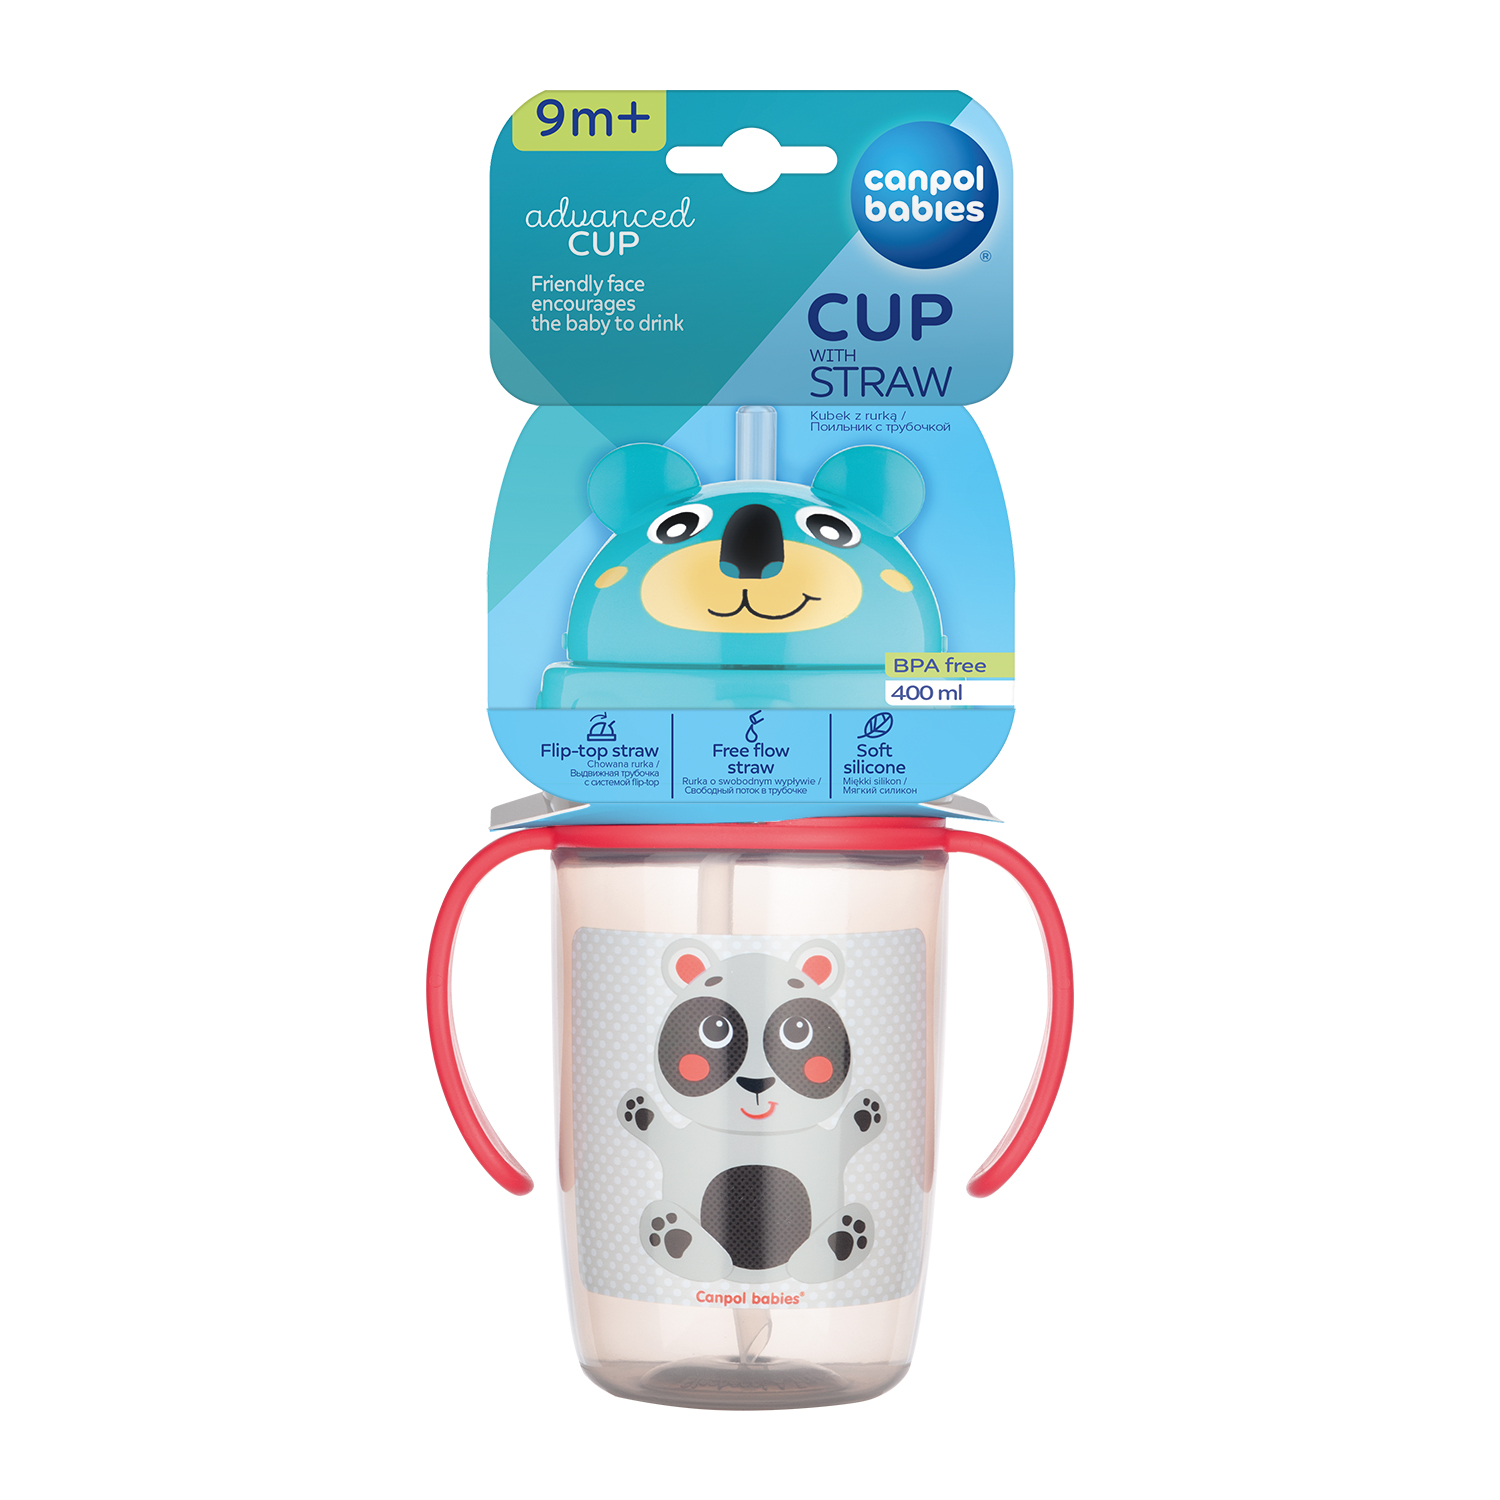 https://canpolbabies.com/eCatalog/canpol/eating-and-drinking/cups-and-sport-cups/56-500_bei/56_500_bei_pack_front.jpg